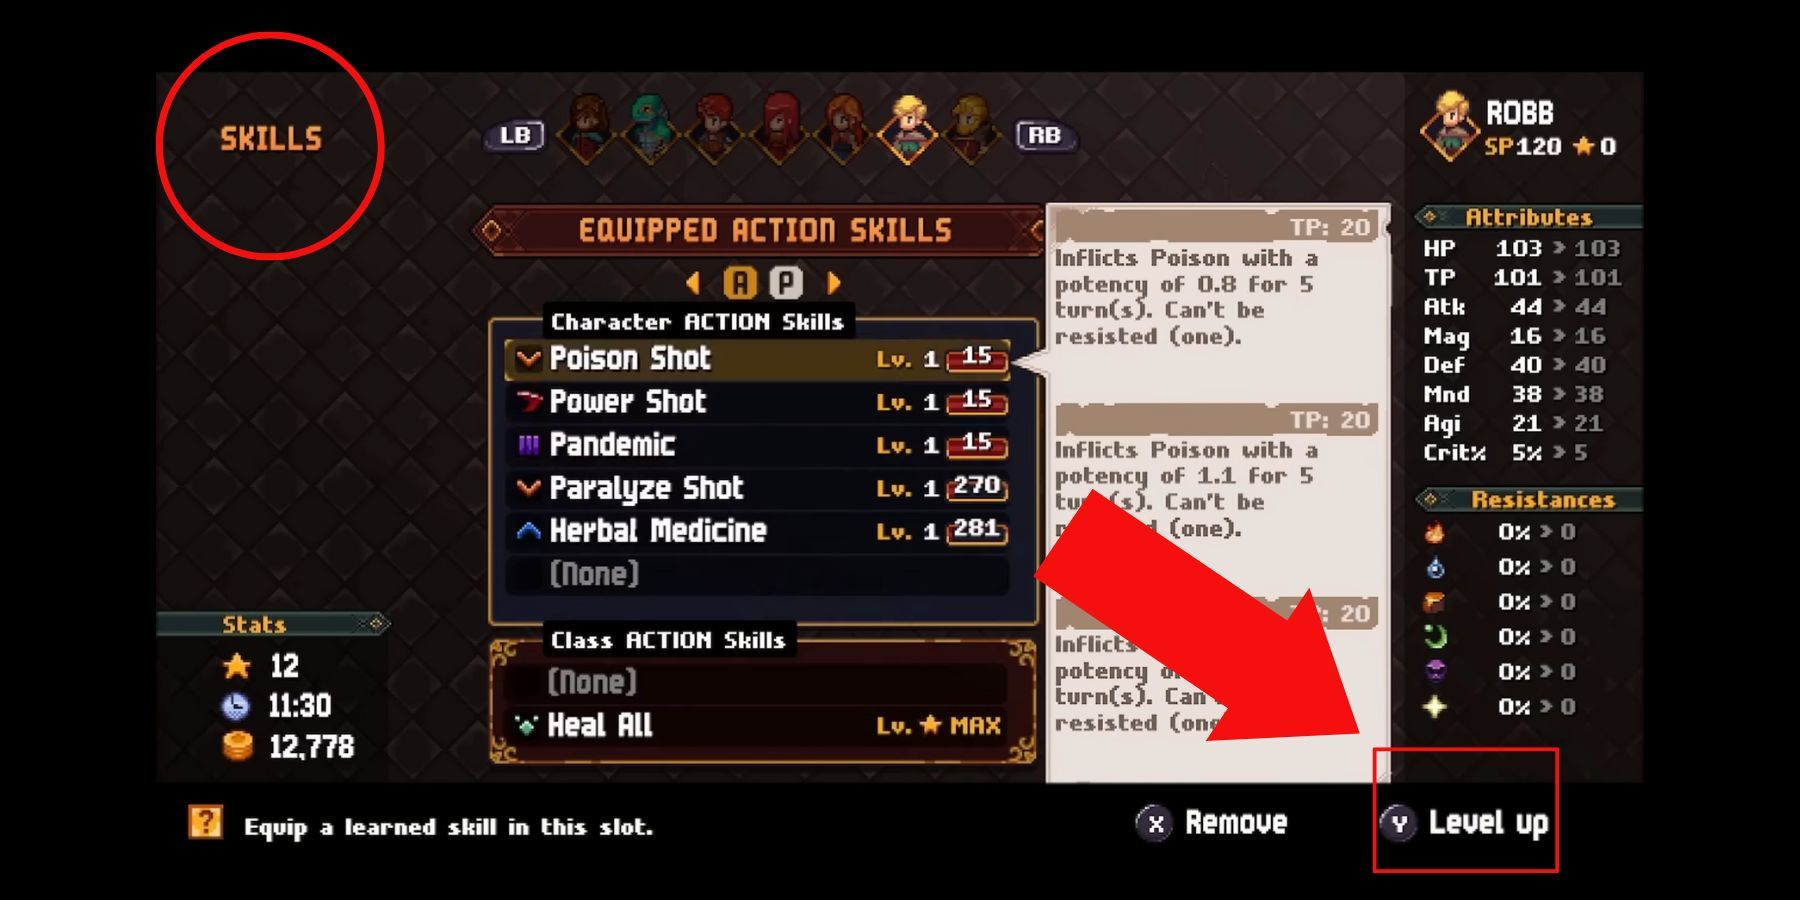 skill upgrade menu in chained echoes.